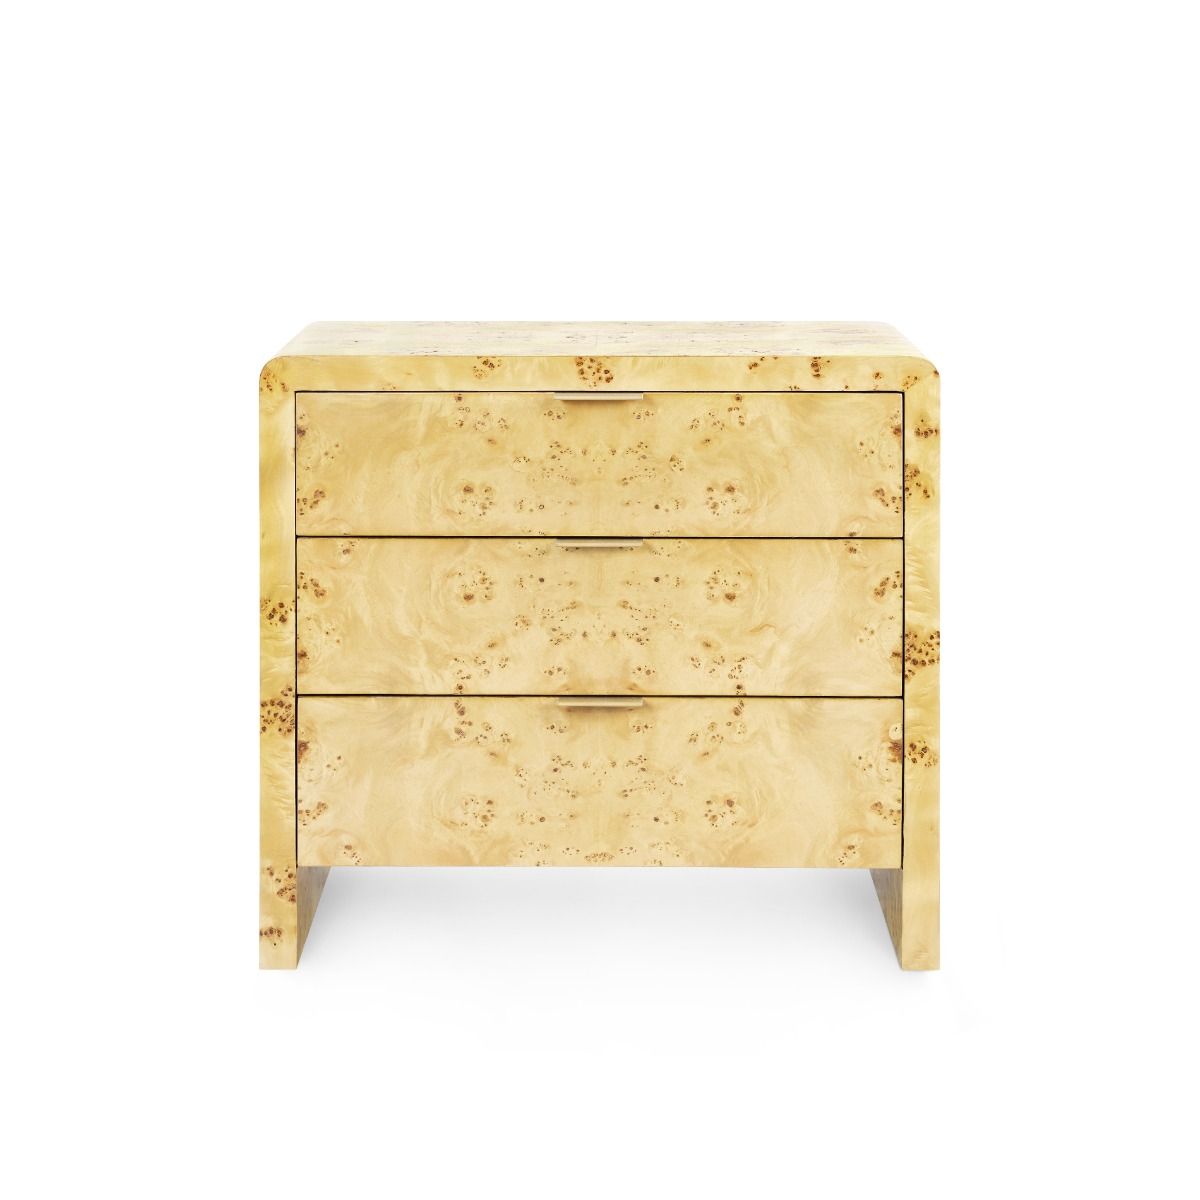 Mariano 3 Drawer Burl Wood End Table